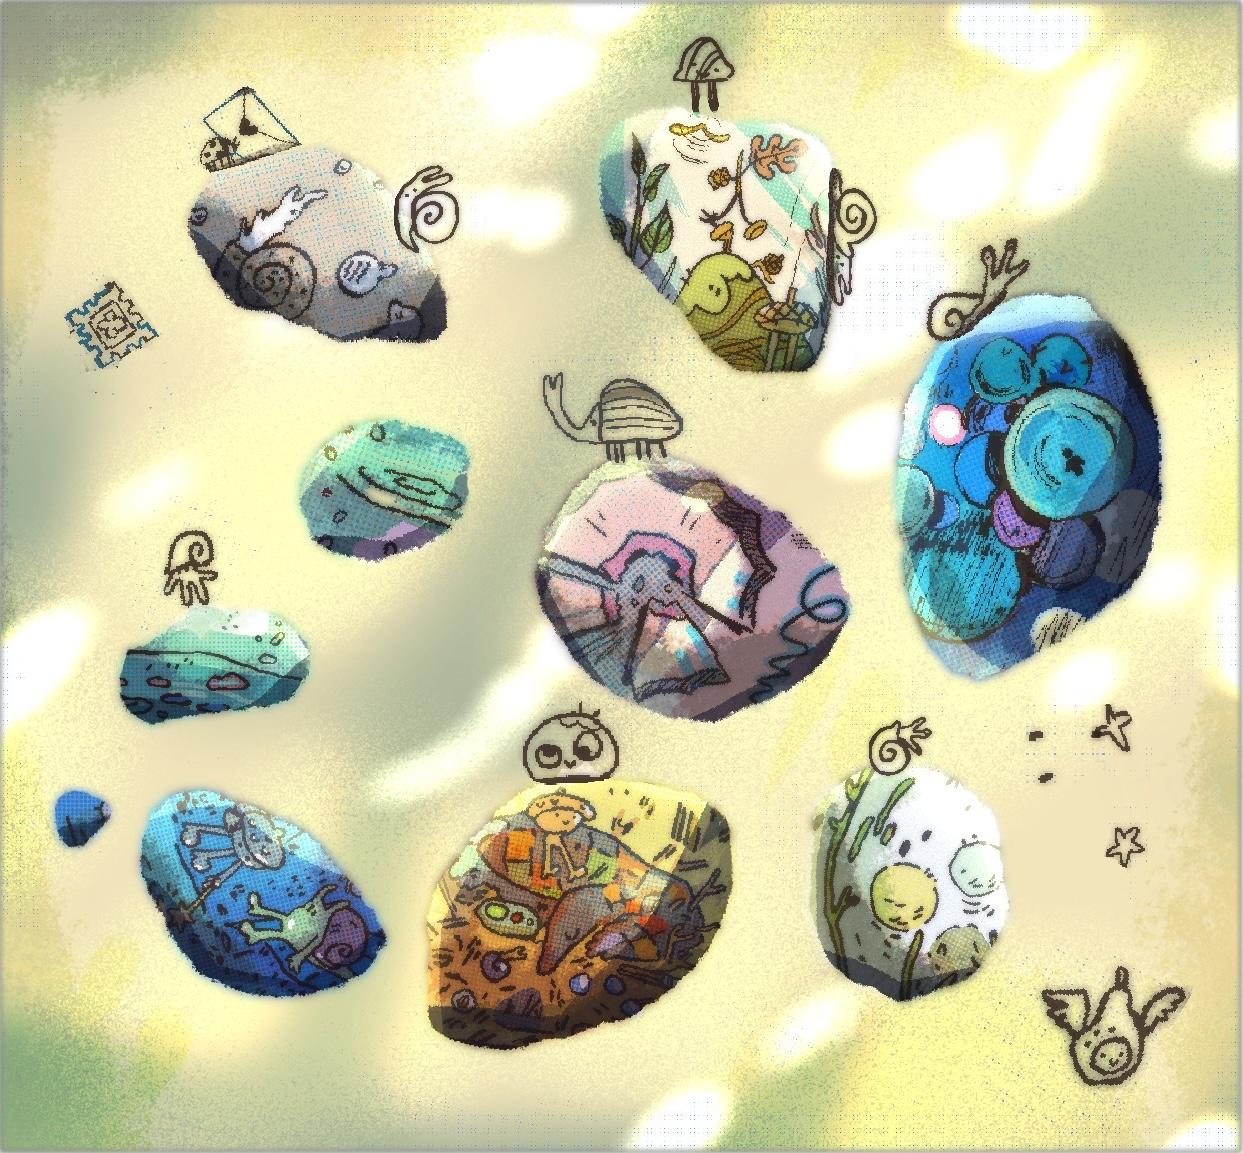 A digital rendering of nine colourful stones on a background of yellow light, each housing the happenings of small beings.